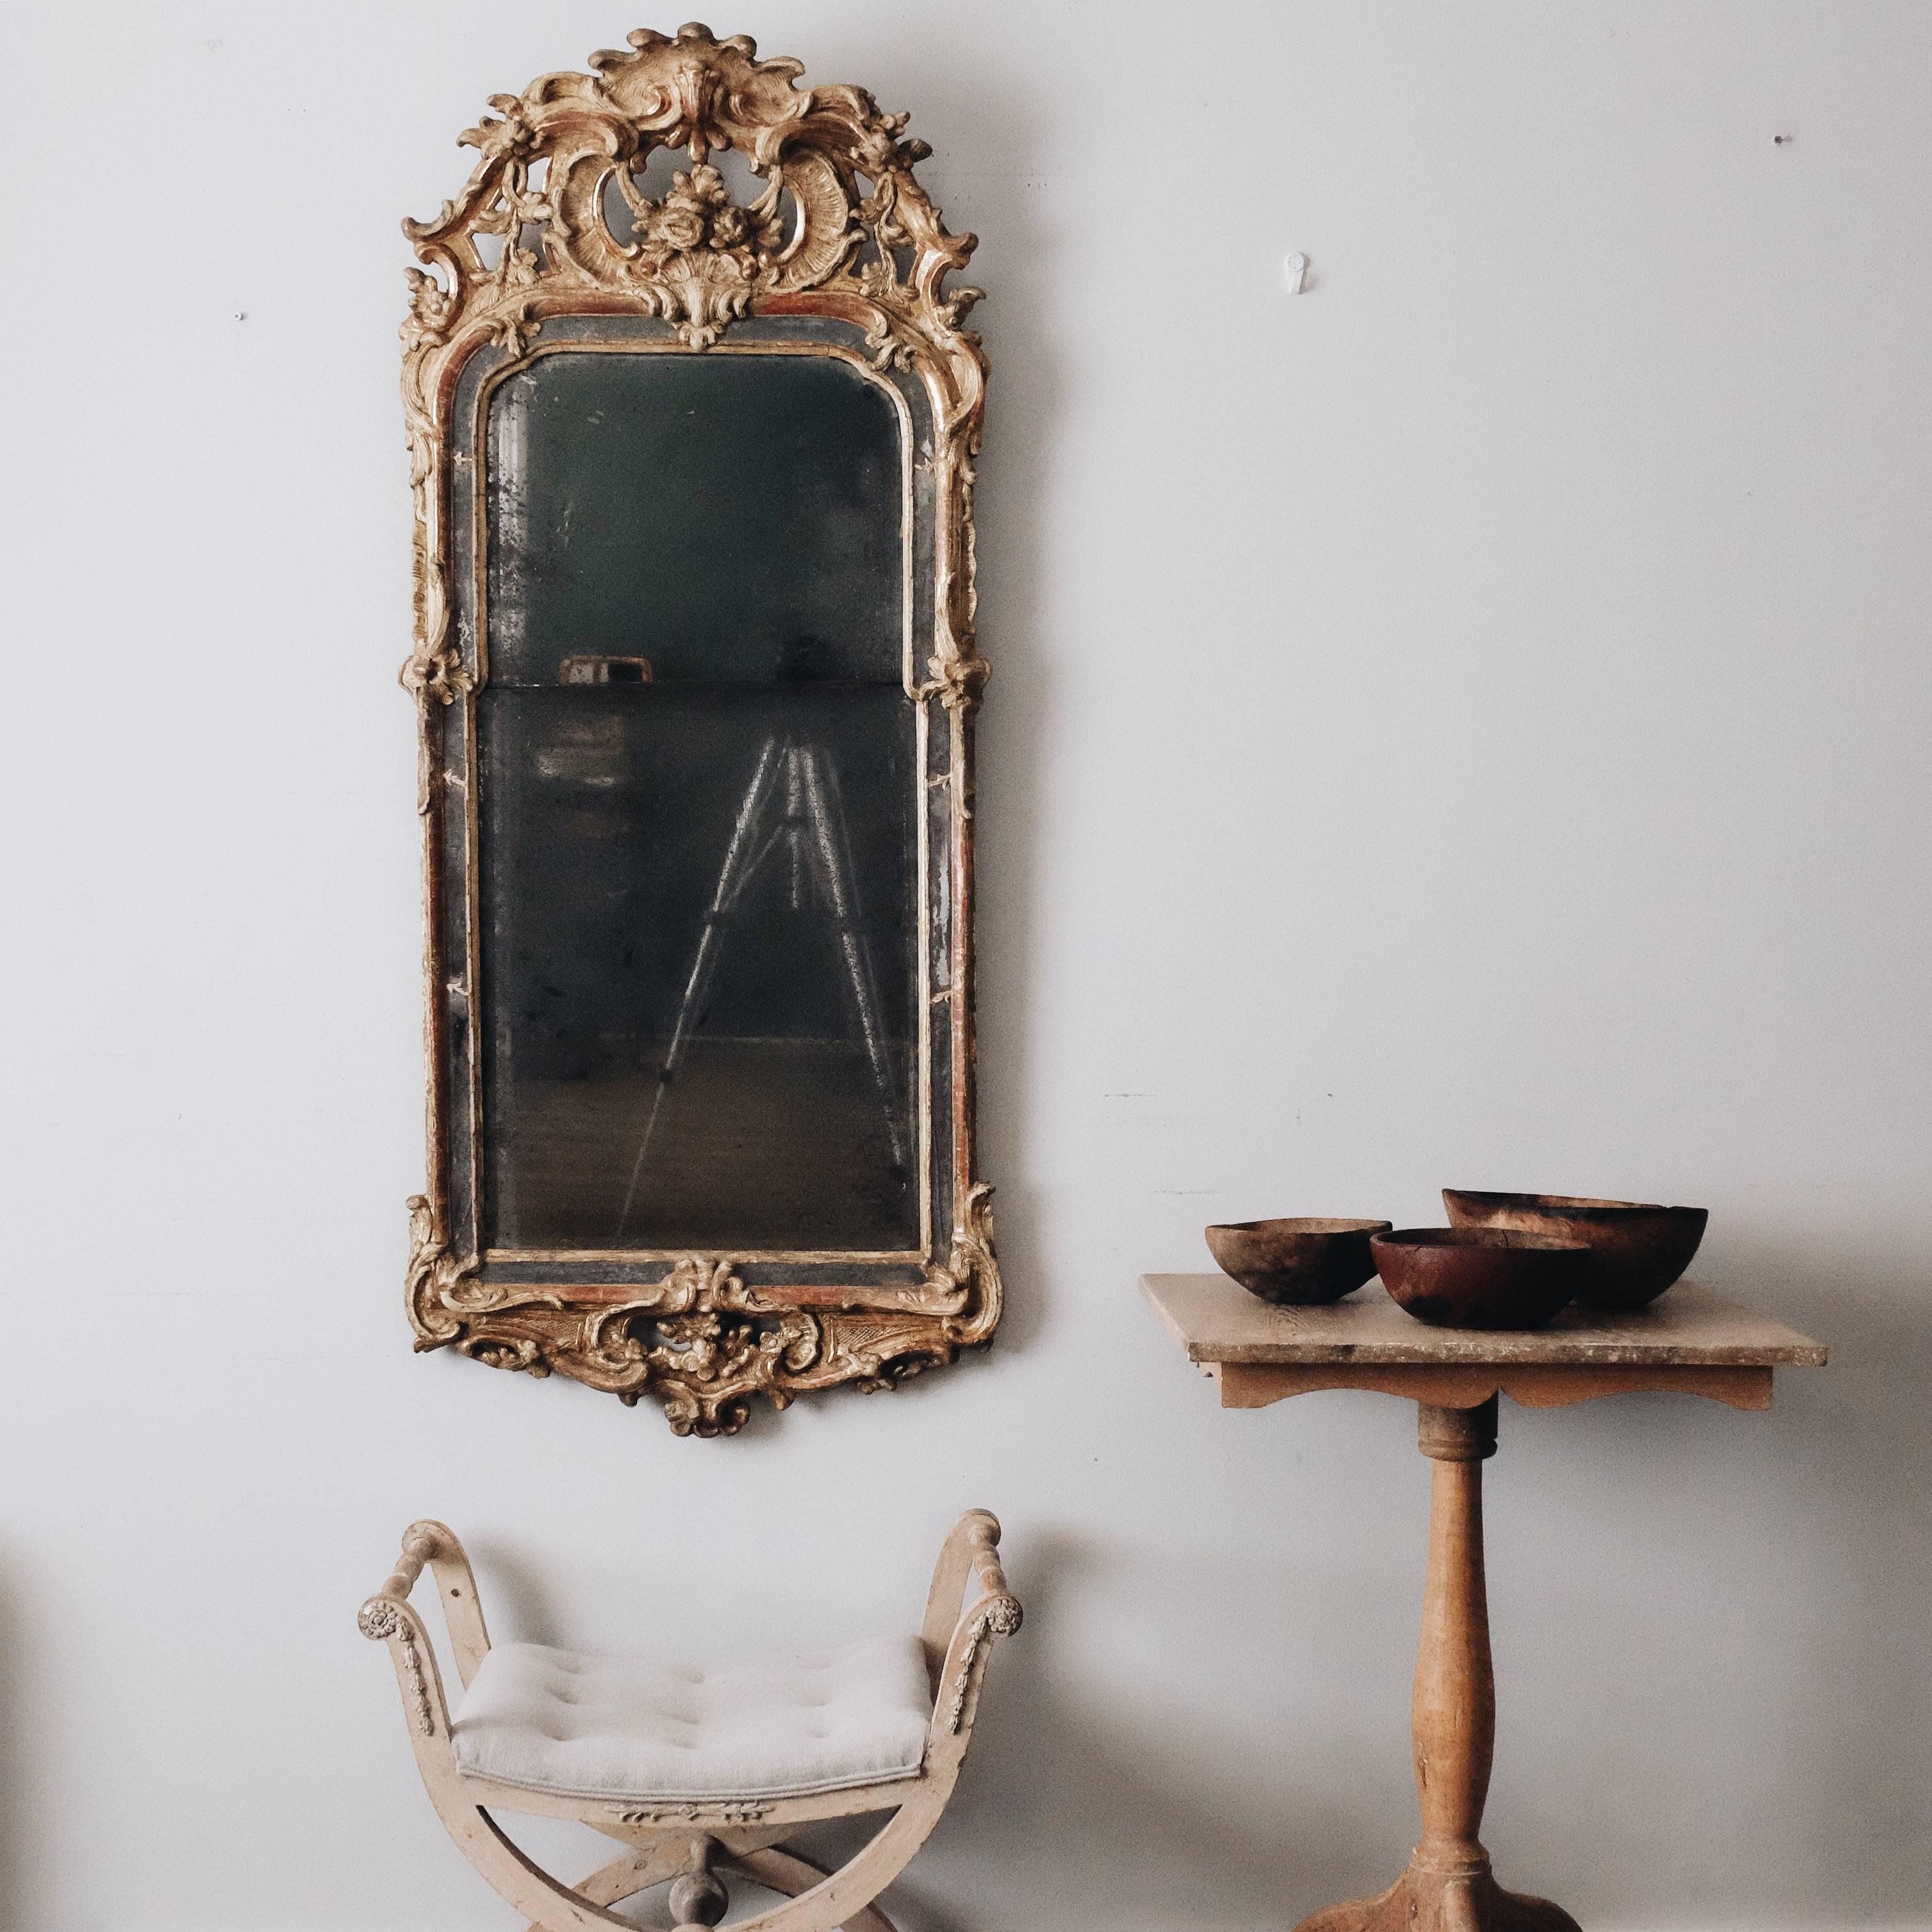 Fine 18th century Swedish gilt wood rococo mirror with mirrored inner frame.
 
Condition:    Excellent 
Wear:          Wear consistent with age and use
Finish:         Original Gilt wood
Hardware:    Original Glass 
Year:           1770